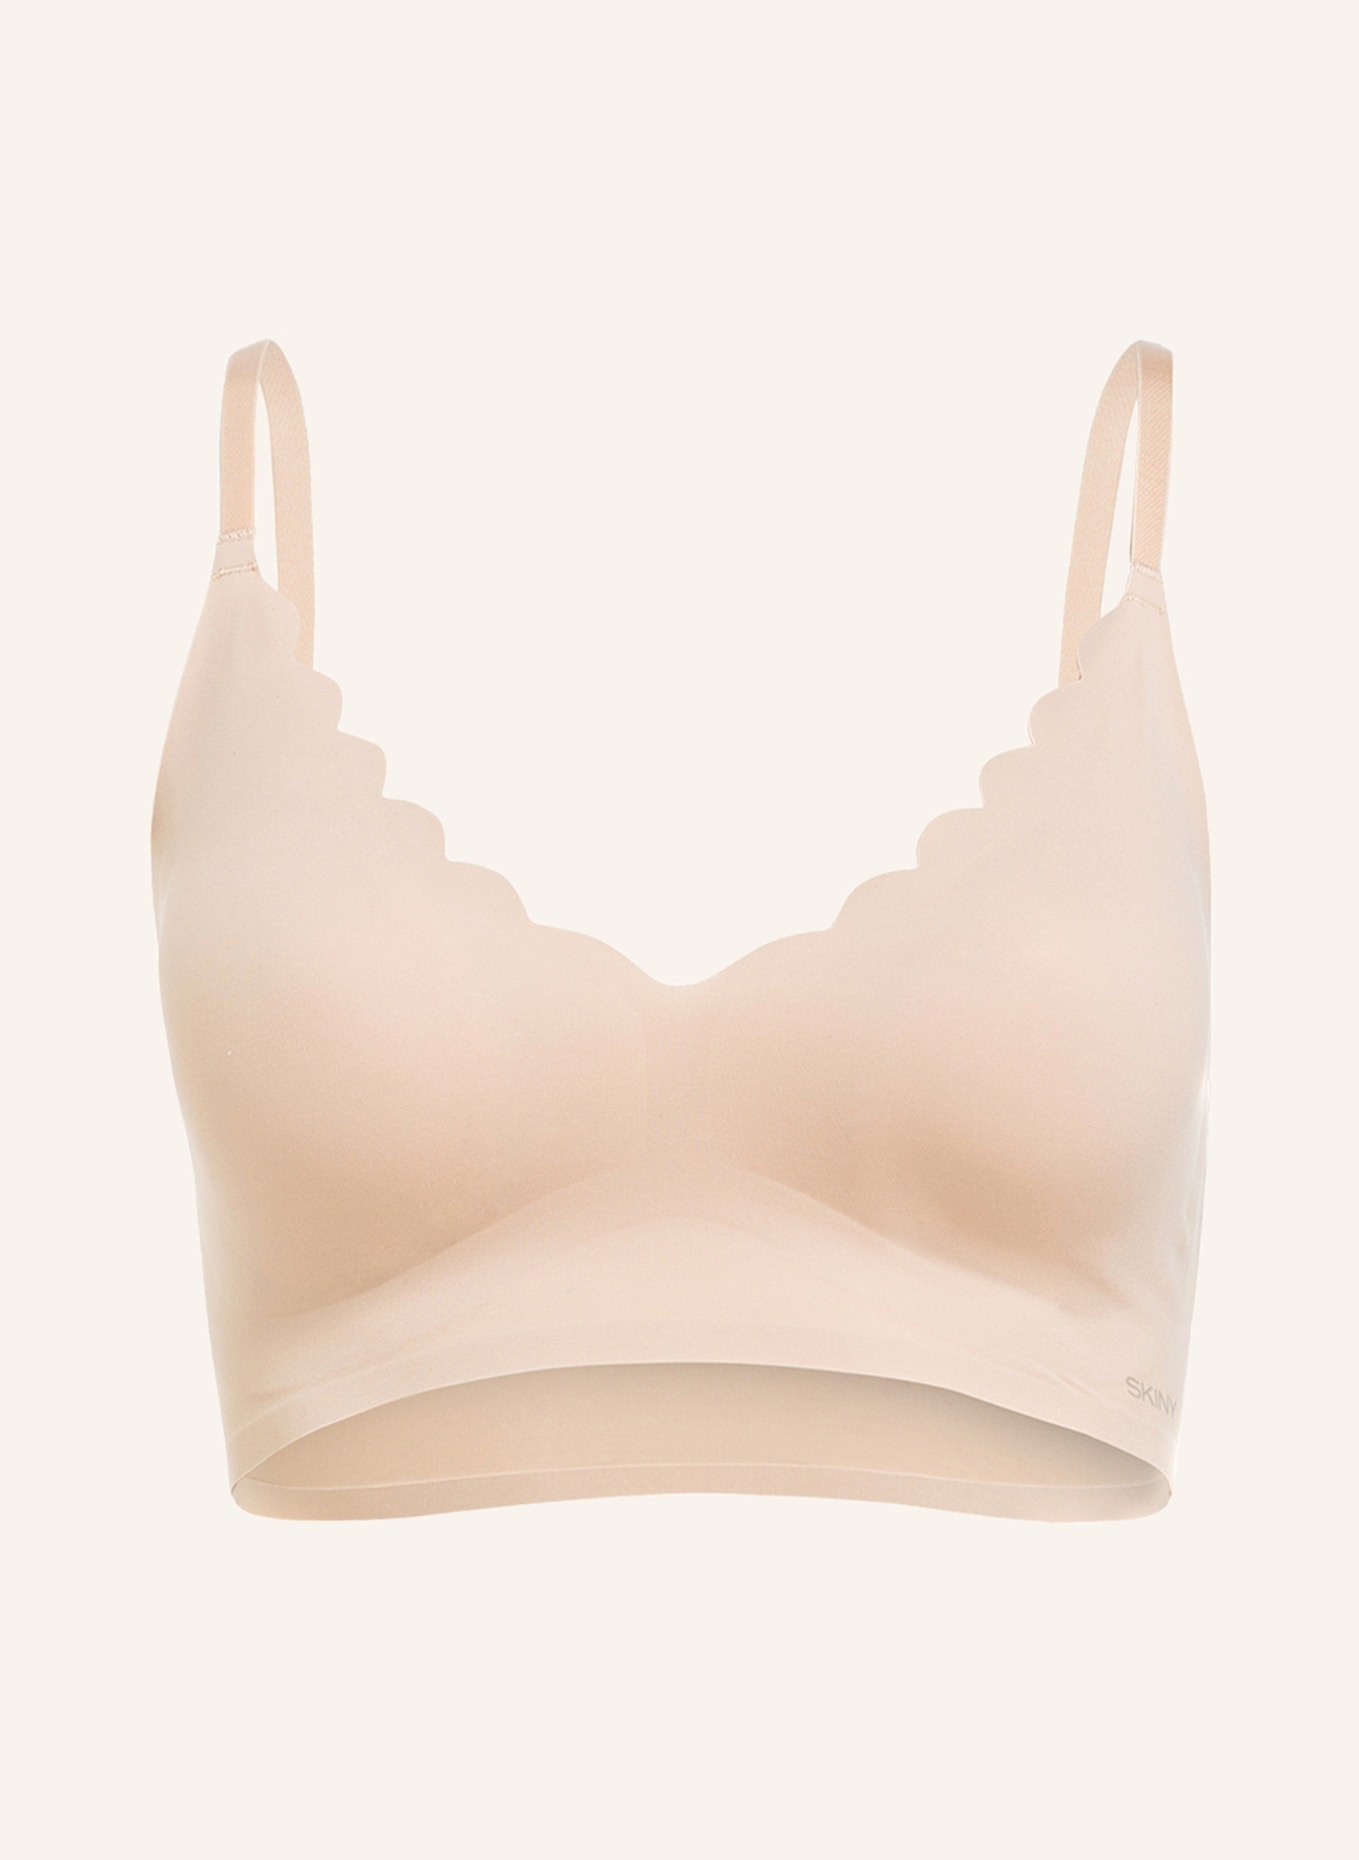 Skiny Bustier EVERY DAY IN MICRO ESSENTIALS, Farbe: NUDE (Bild 1)